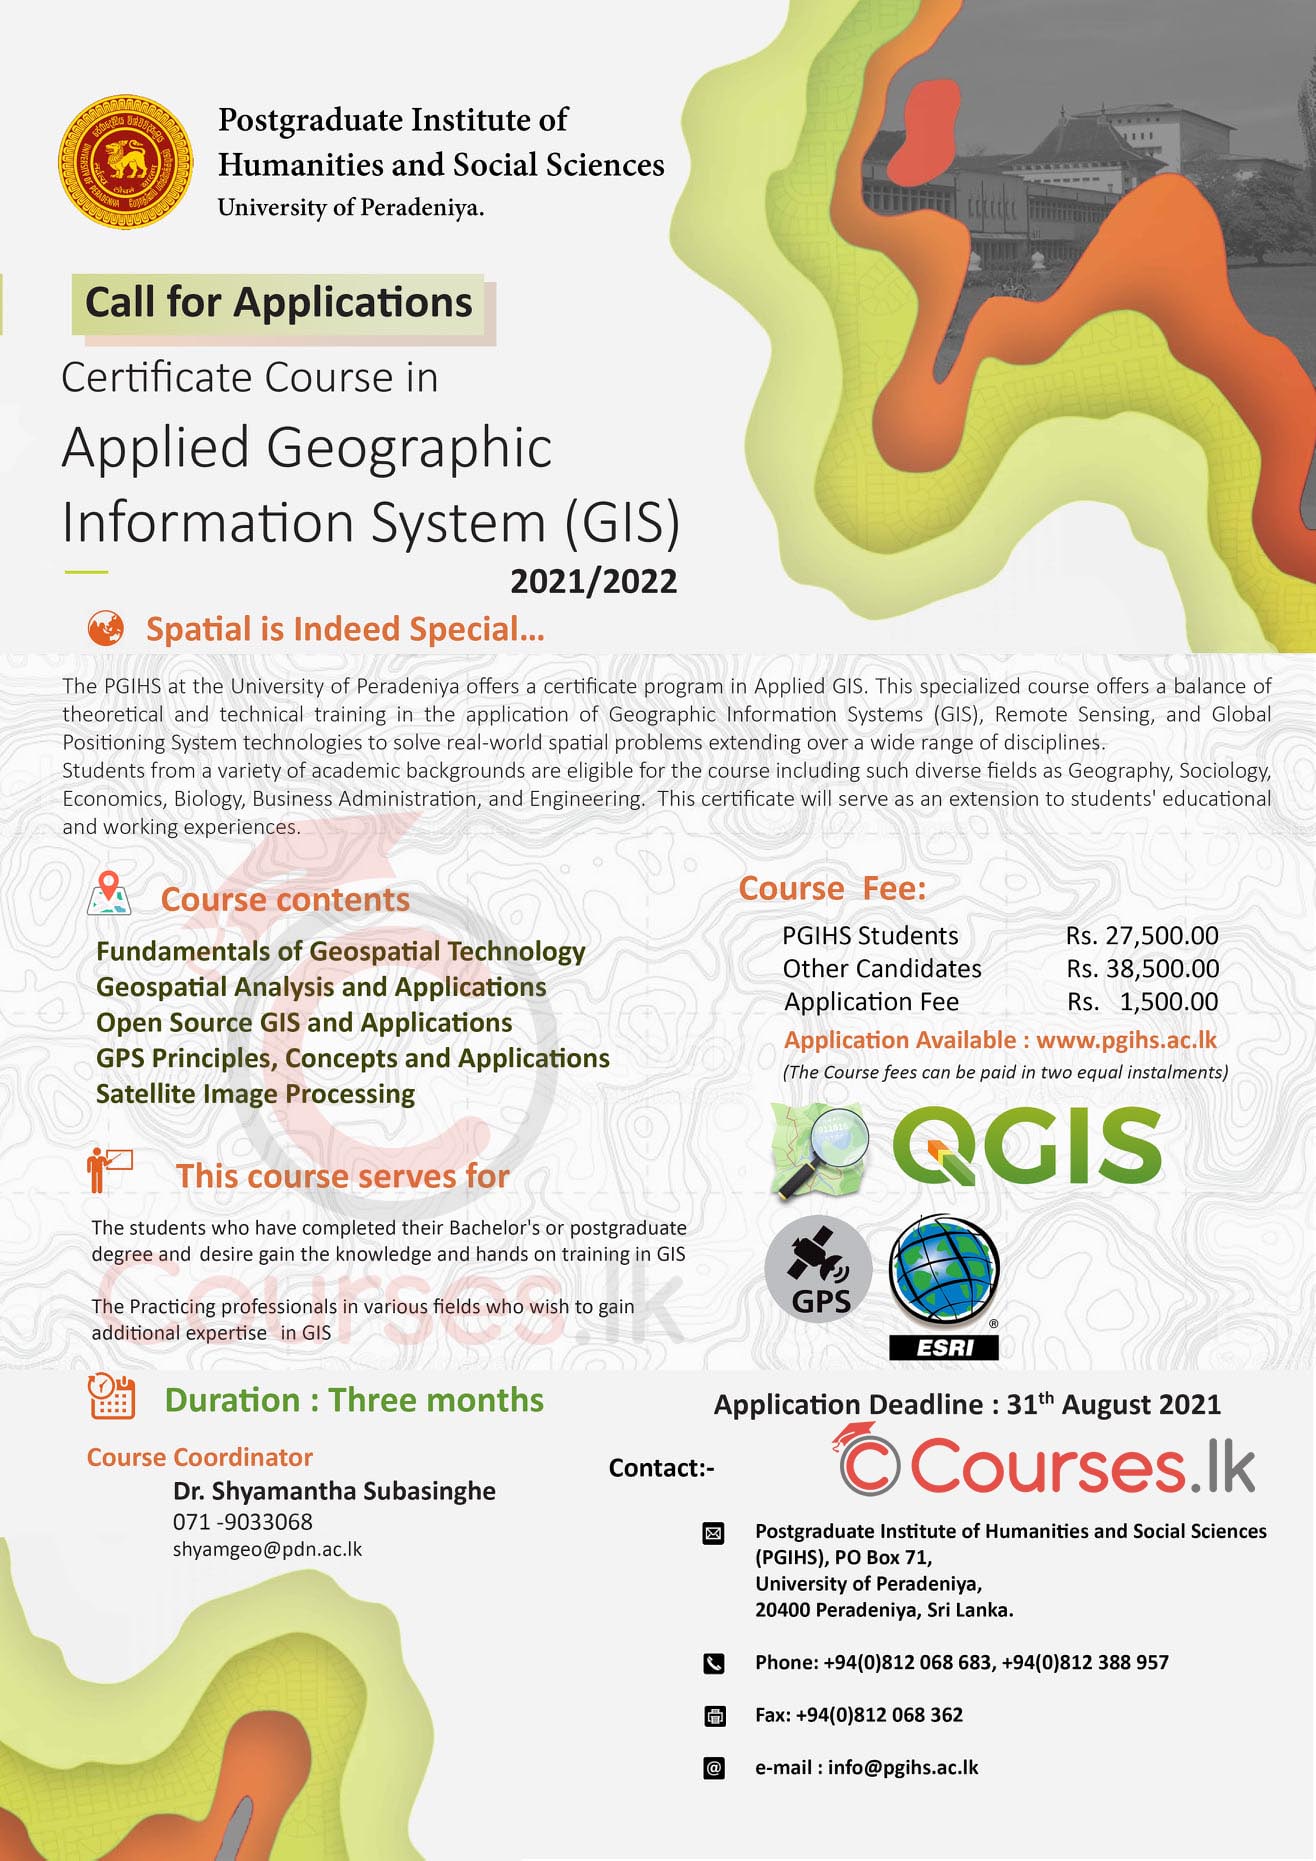 Certificate in Applied Geographic Information System (GIS) 2021/2022 - University of Peradeniya